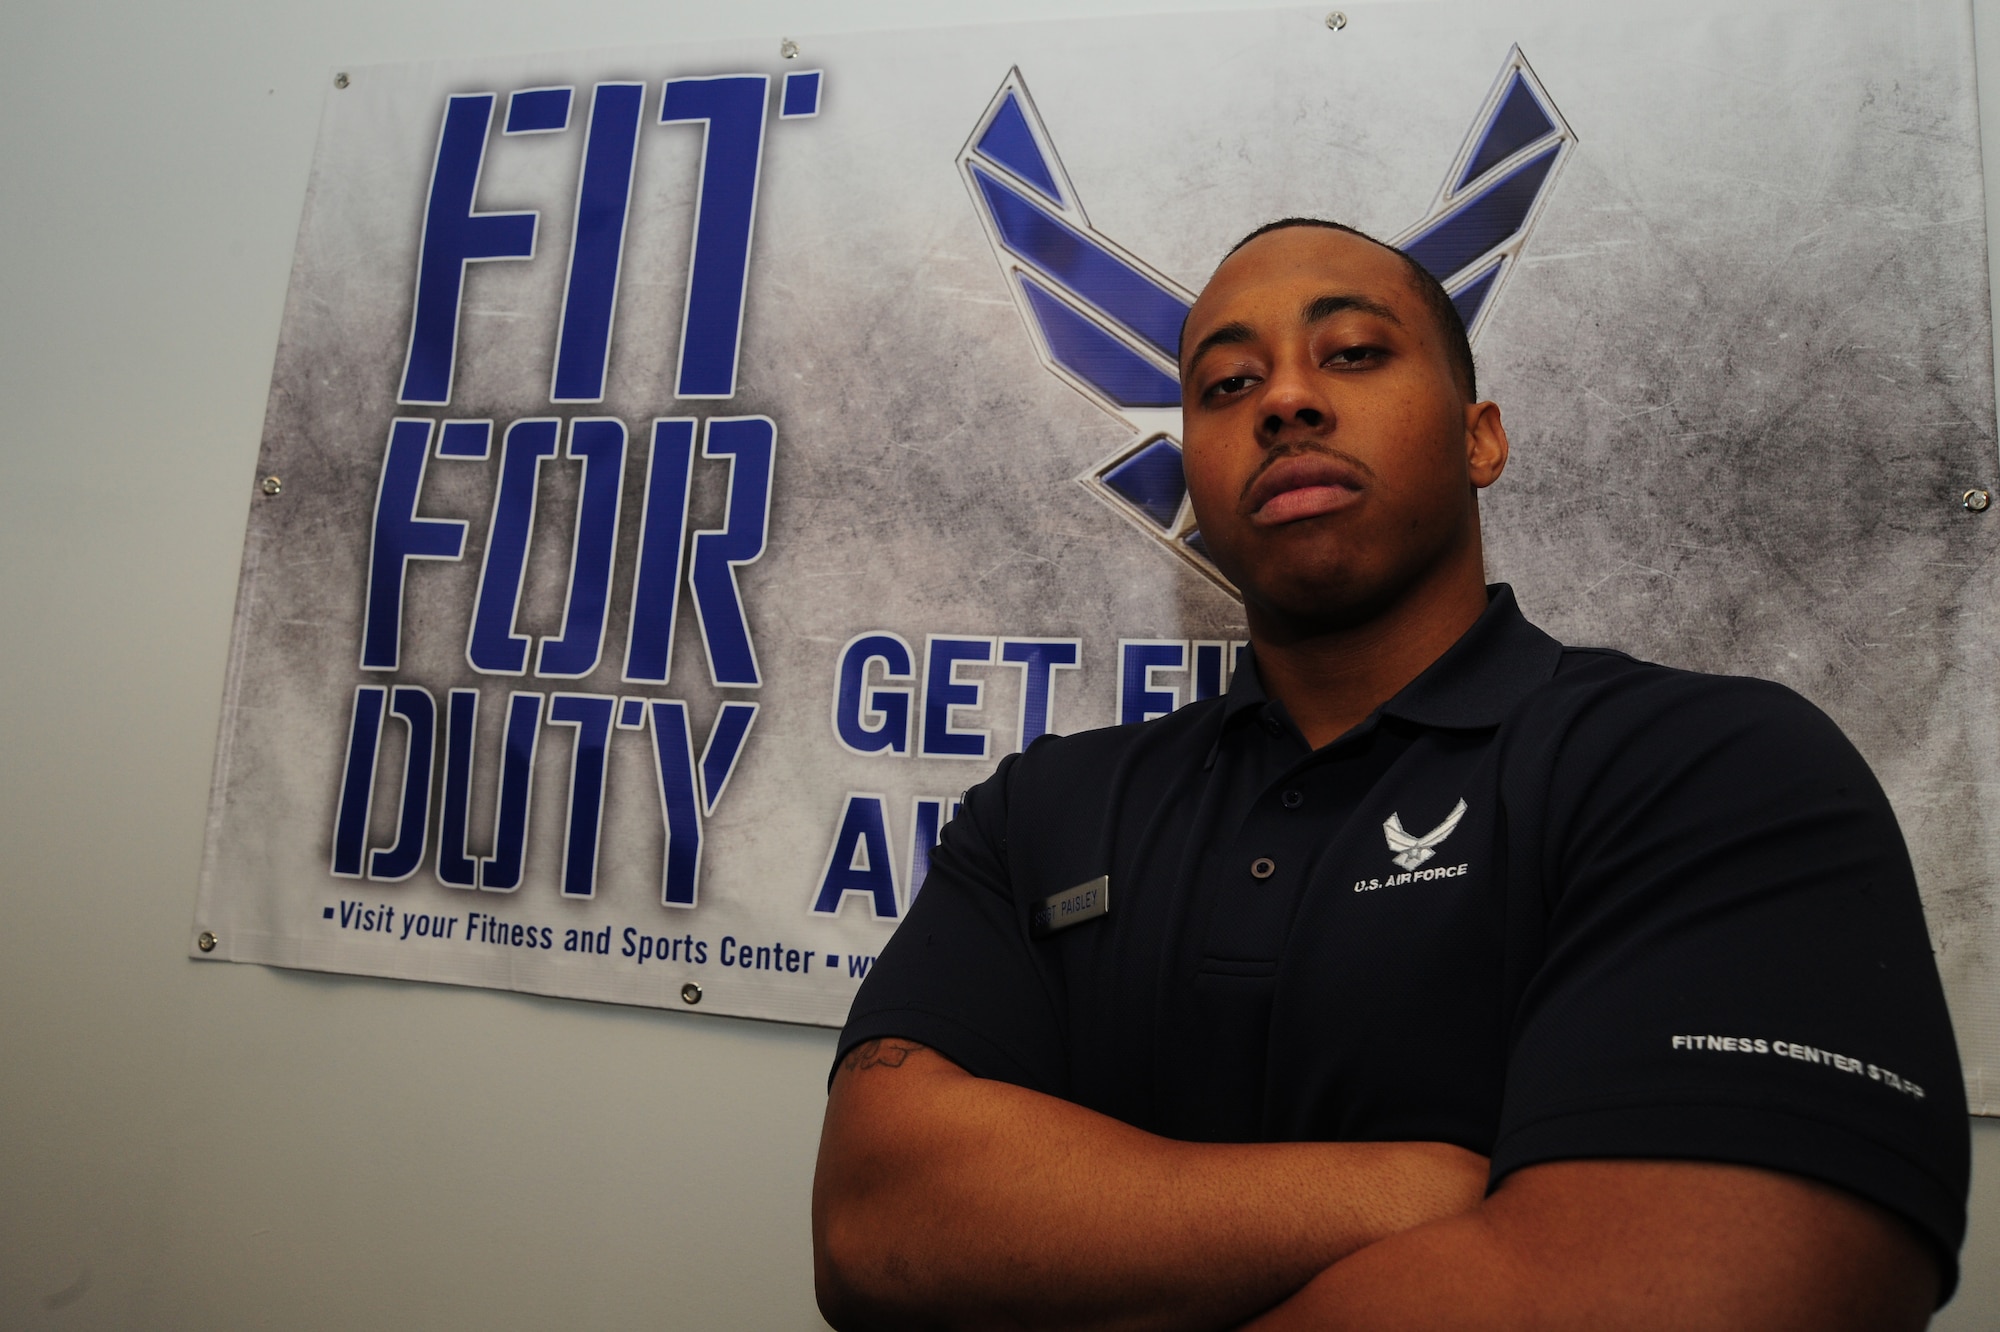 Staff Sgt. Adrian Paisley, 509th Force Support Squadron fitness center specialist, was deployed to Southwest Asia, alongside a team of nine other Airmen from the 509th FSS, from July 2013 to January 2014. The team’s mission was to help organize and refurbish a nearly empty fitness center. They also assisted other units as they set up various facilities on base.. (U.S. Air Force photo by Staff Sgt. Nick Wilson/Released)